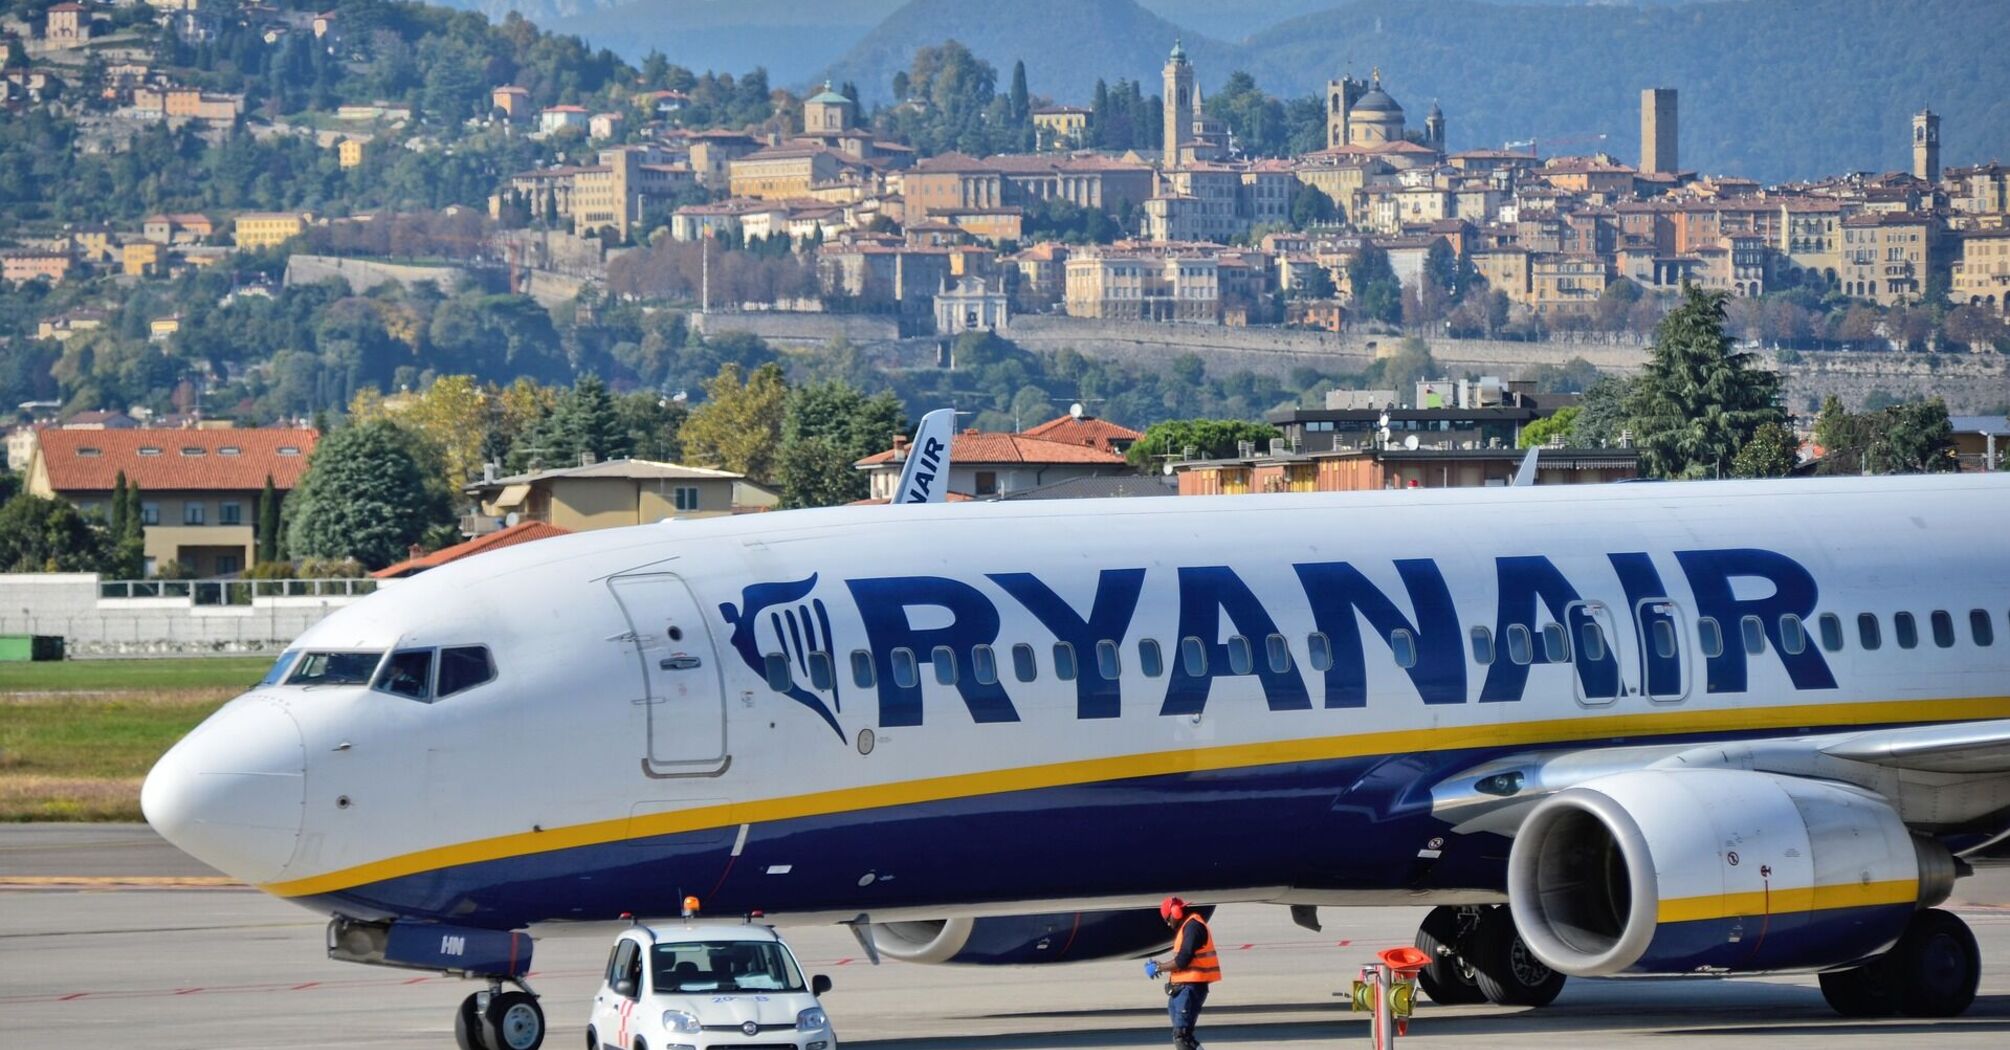 Ryanair announced the launch of new flights to Portugal